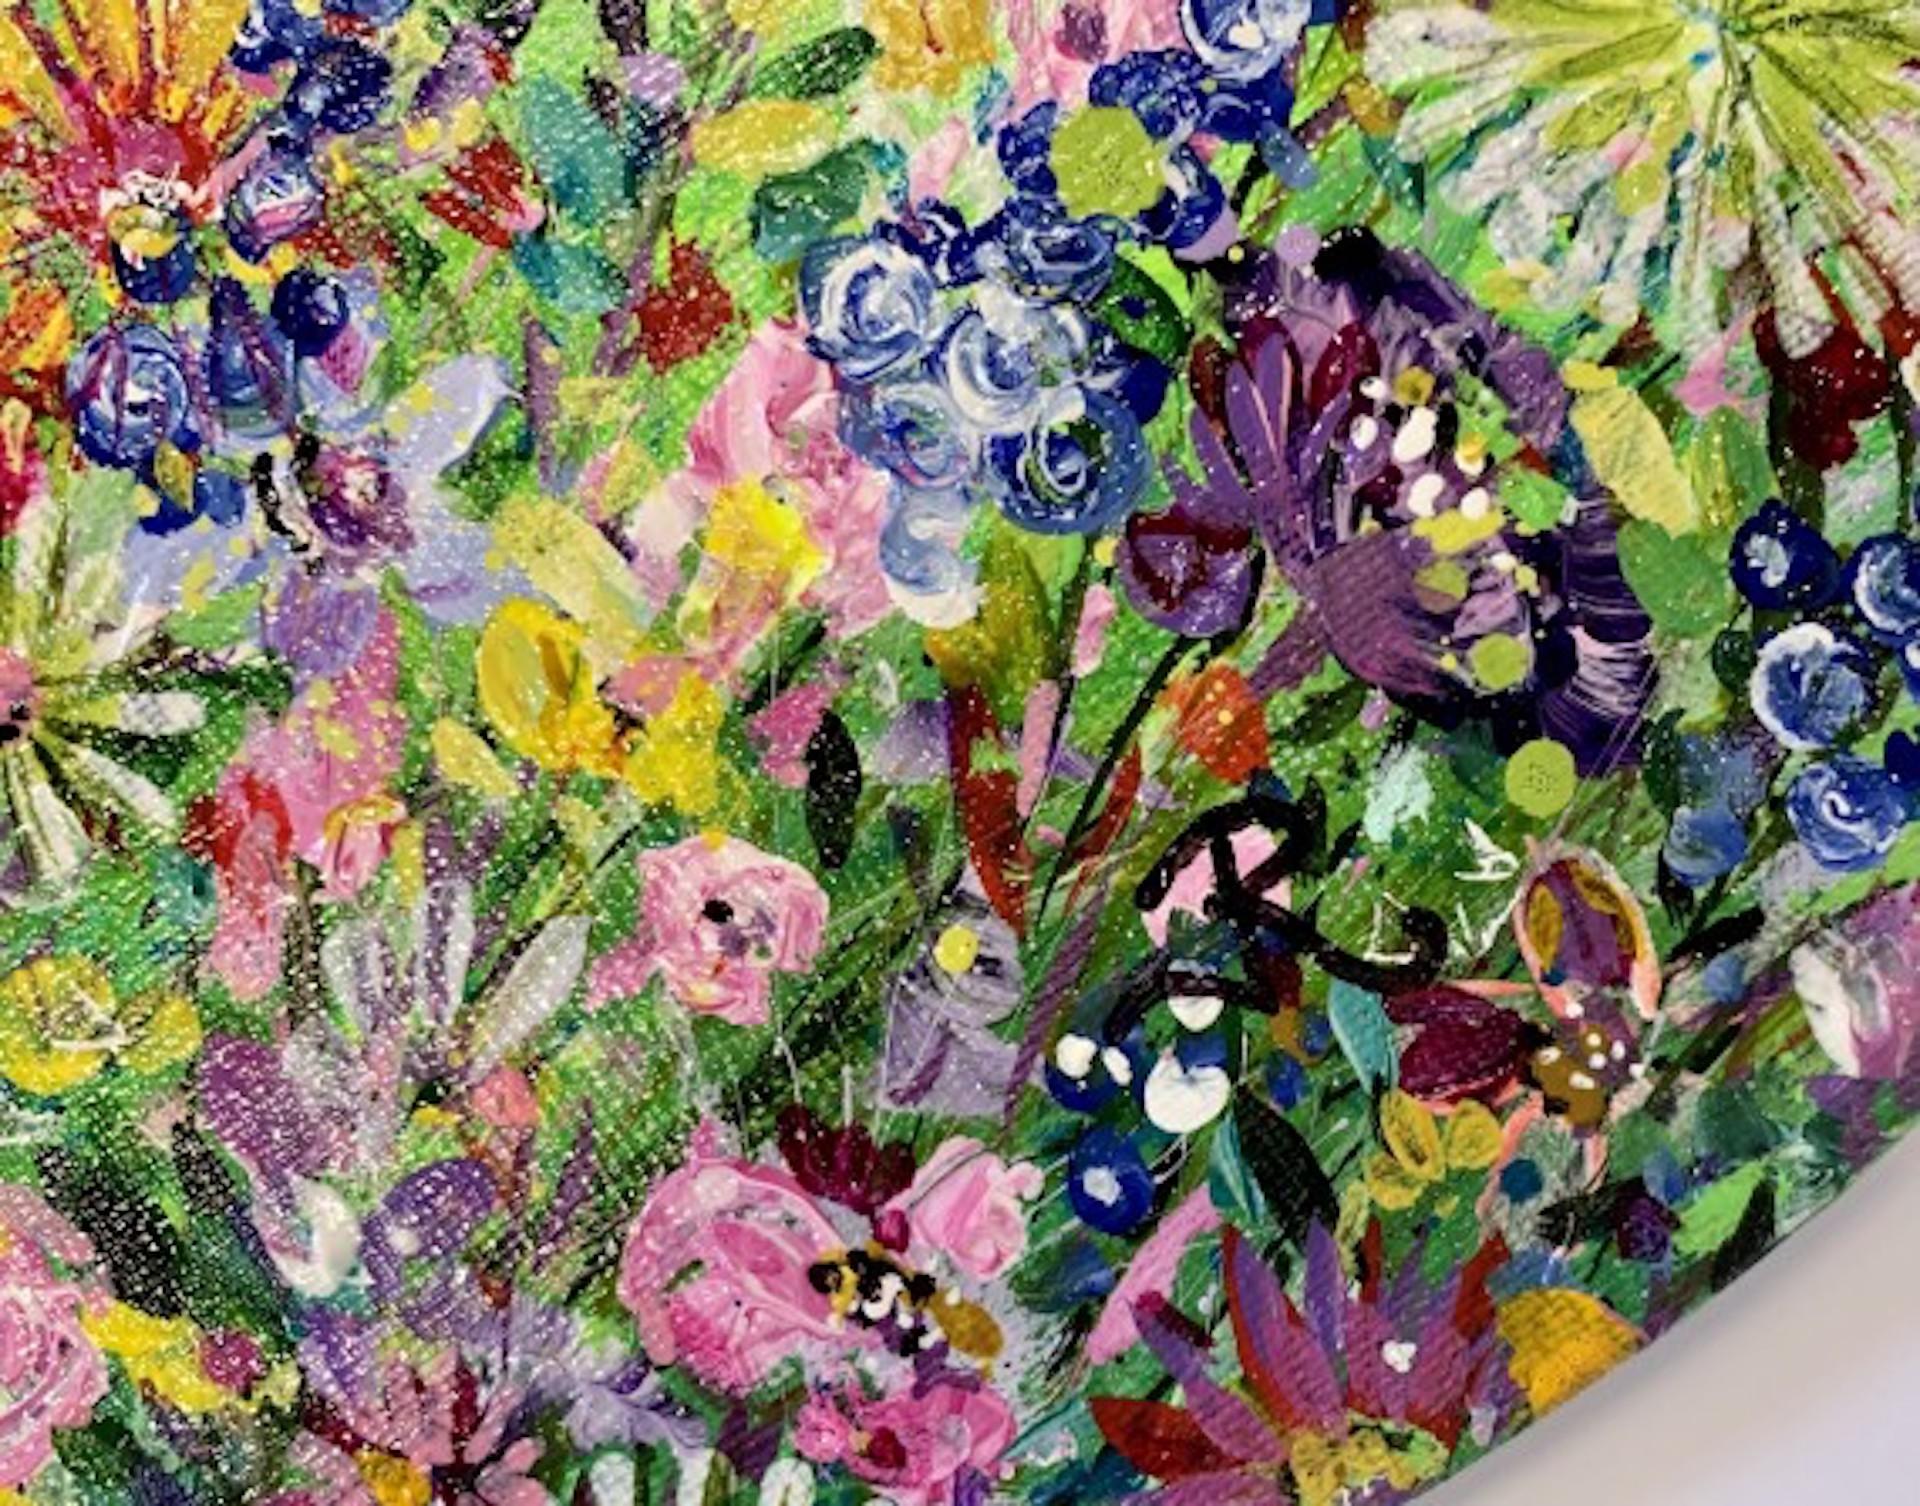 Wild Flower Garden With Bees by Jan Rogers [2021]
original

Acrylic paint on canvas

Image size: H:30 cm x W:30 cm

Complete Size of Unframed Work: H:30 cm x W:30 cm x D:0.1cm

Sold Unframed

Please note that insitu images are purely an indication